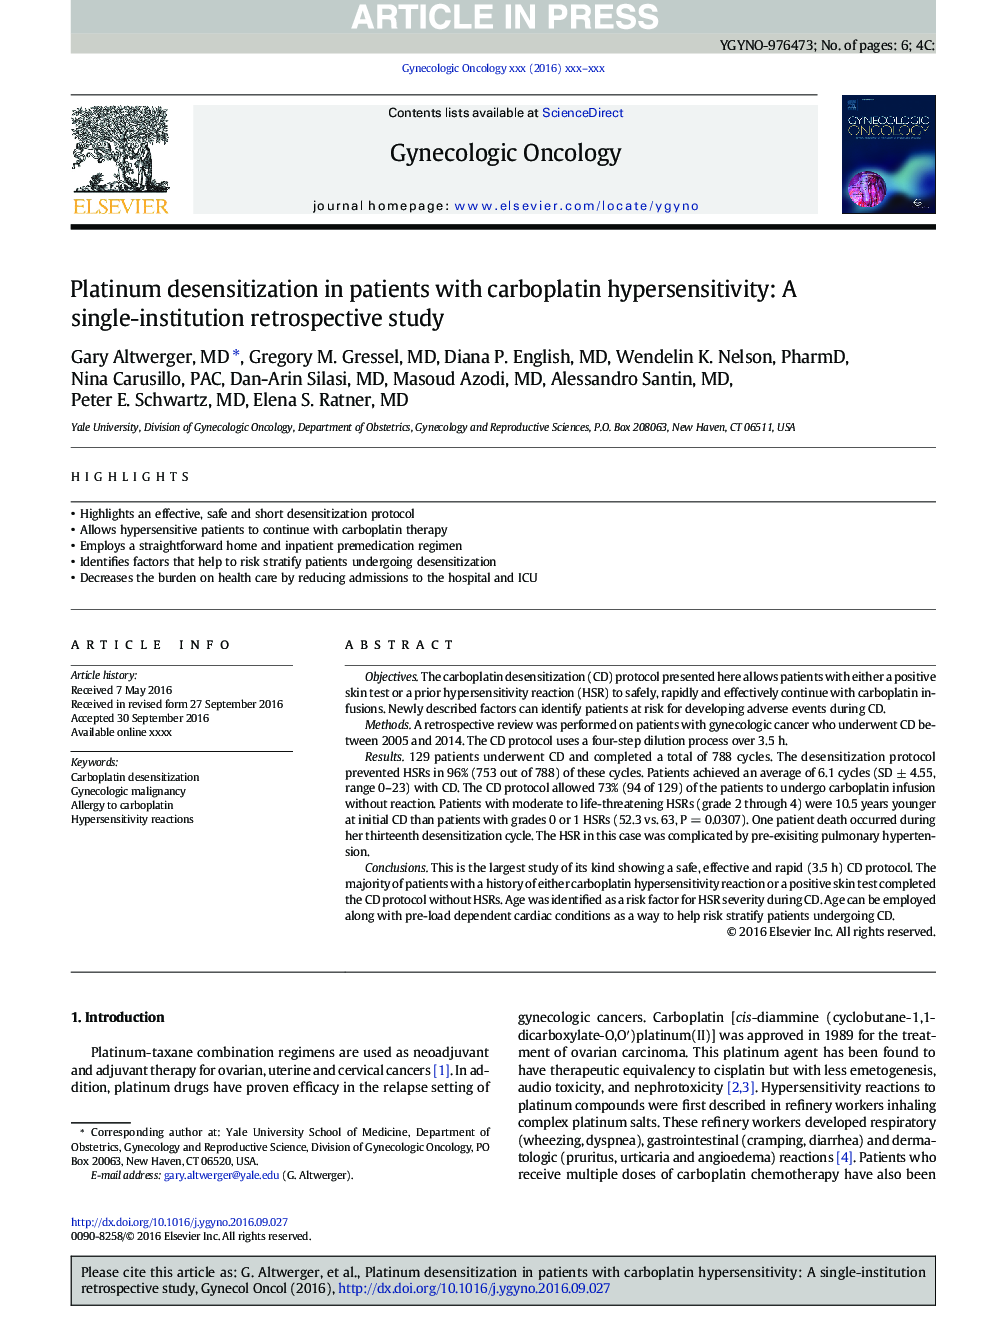 Platinum desensitization in patients with carboplatin hypersensitivity: A single-institution retrospective study